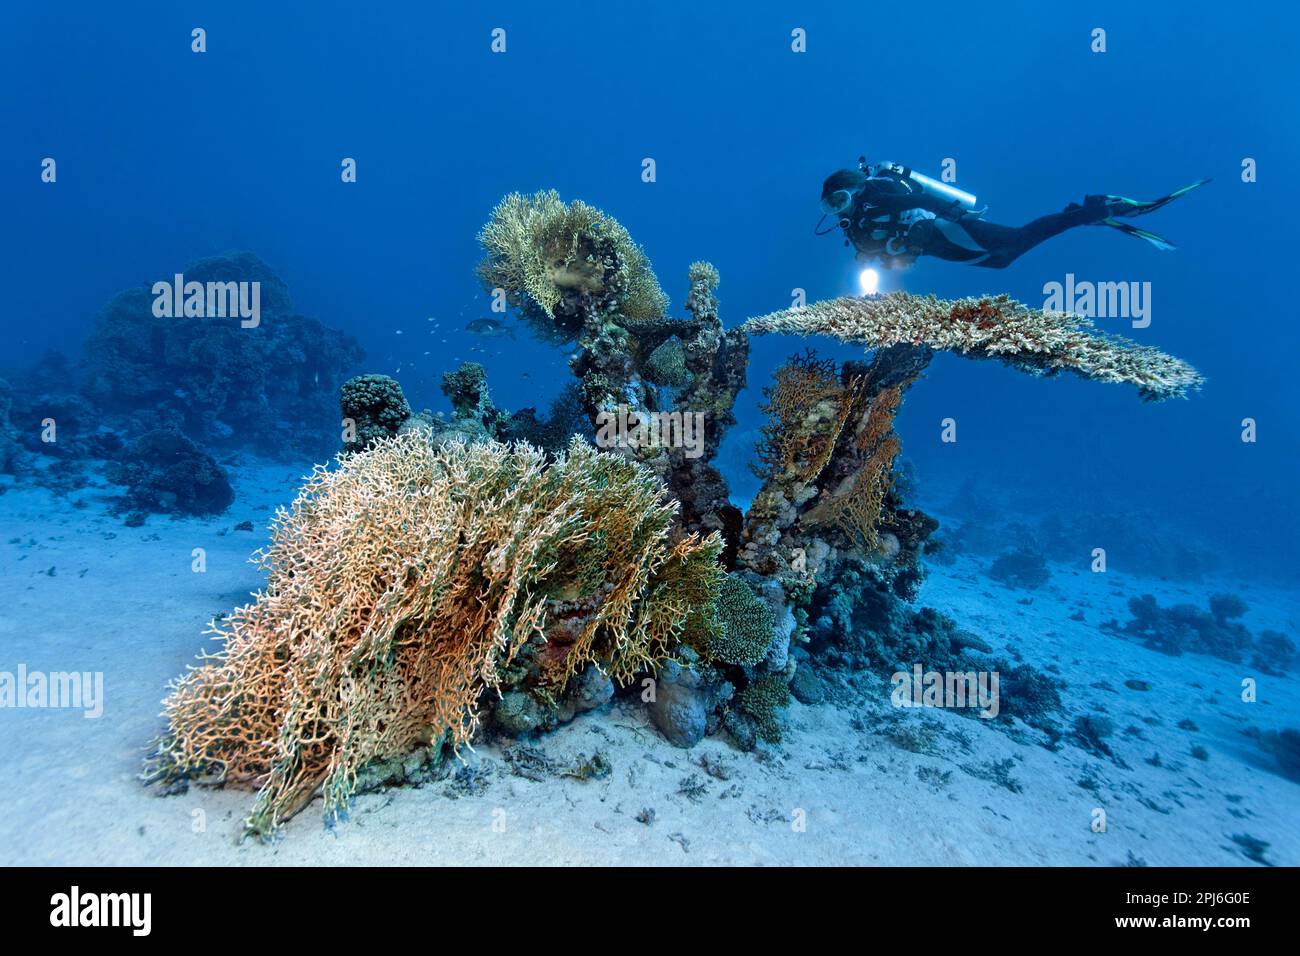 Female diver, diver hovering over large Acropora table coral (Acropora acuminata), front net fire coral (Milleporadichotoma), sandy bottom, Red Sea Stock Photo